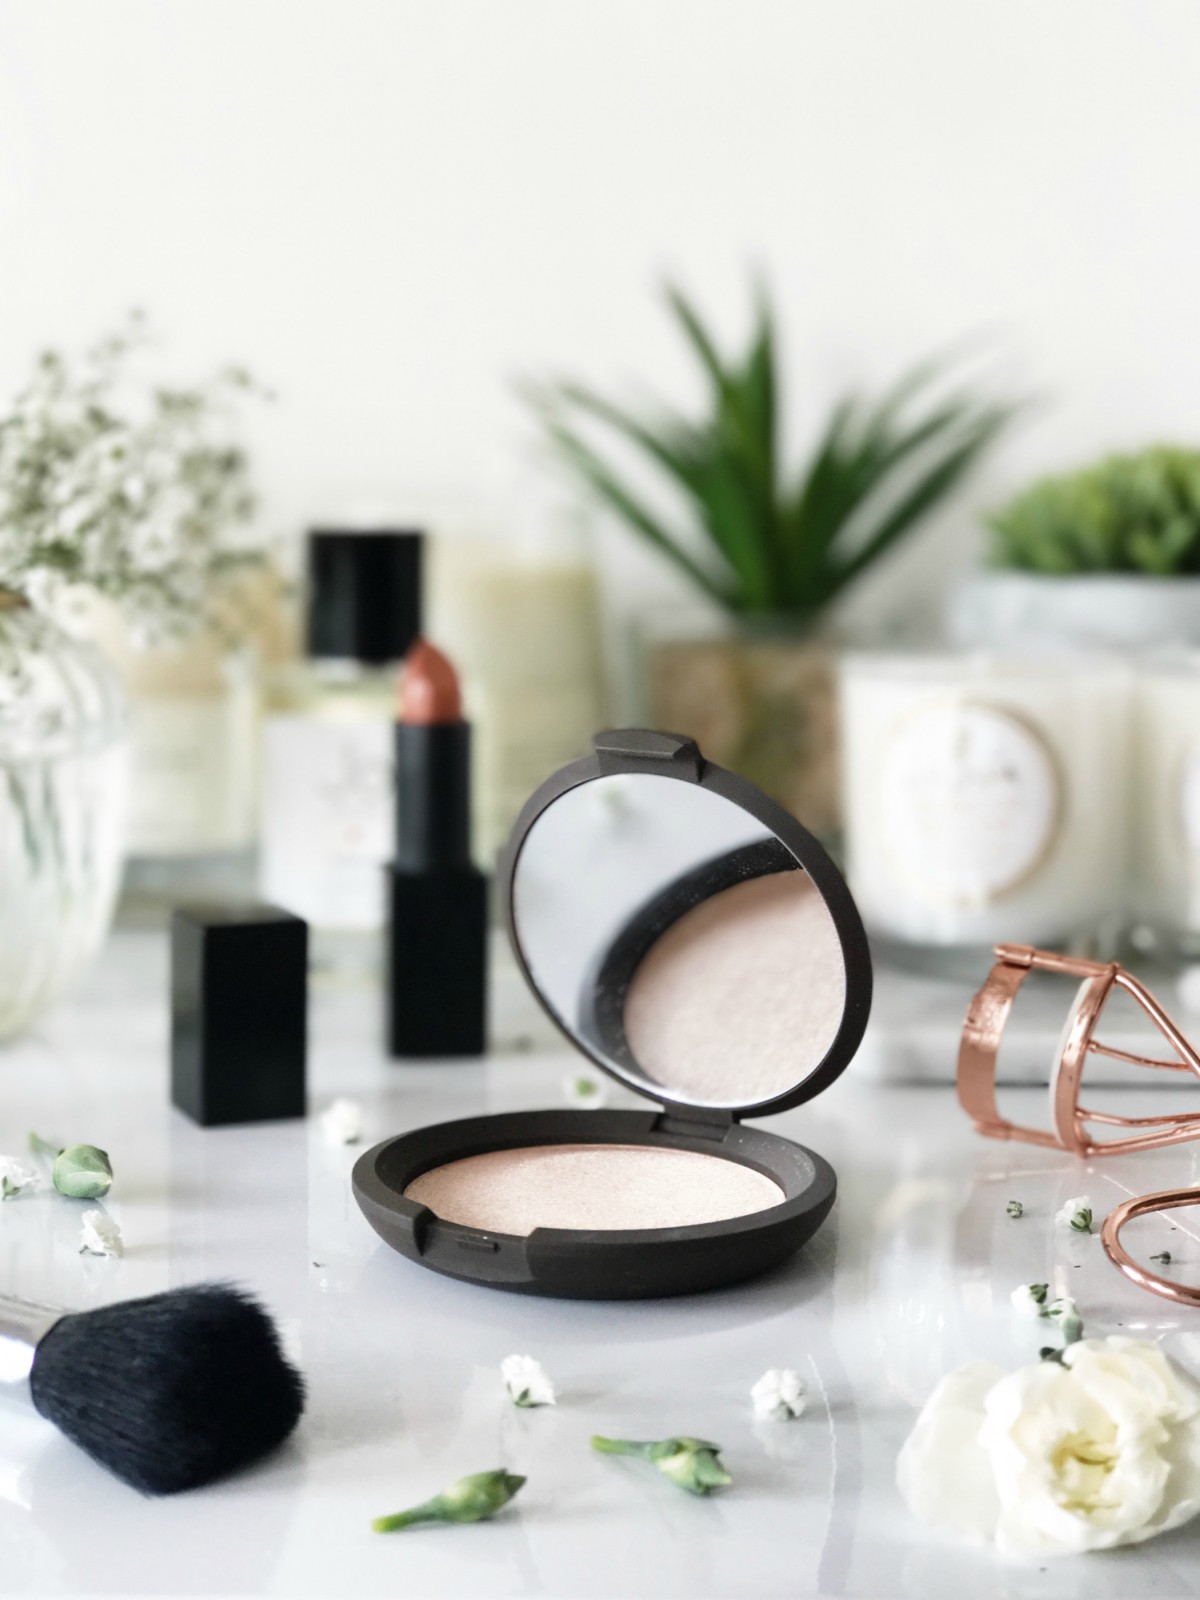 Becca Shimmering Skin Perfector in Opal Review 